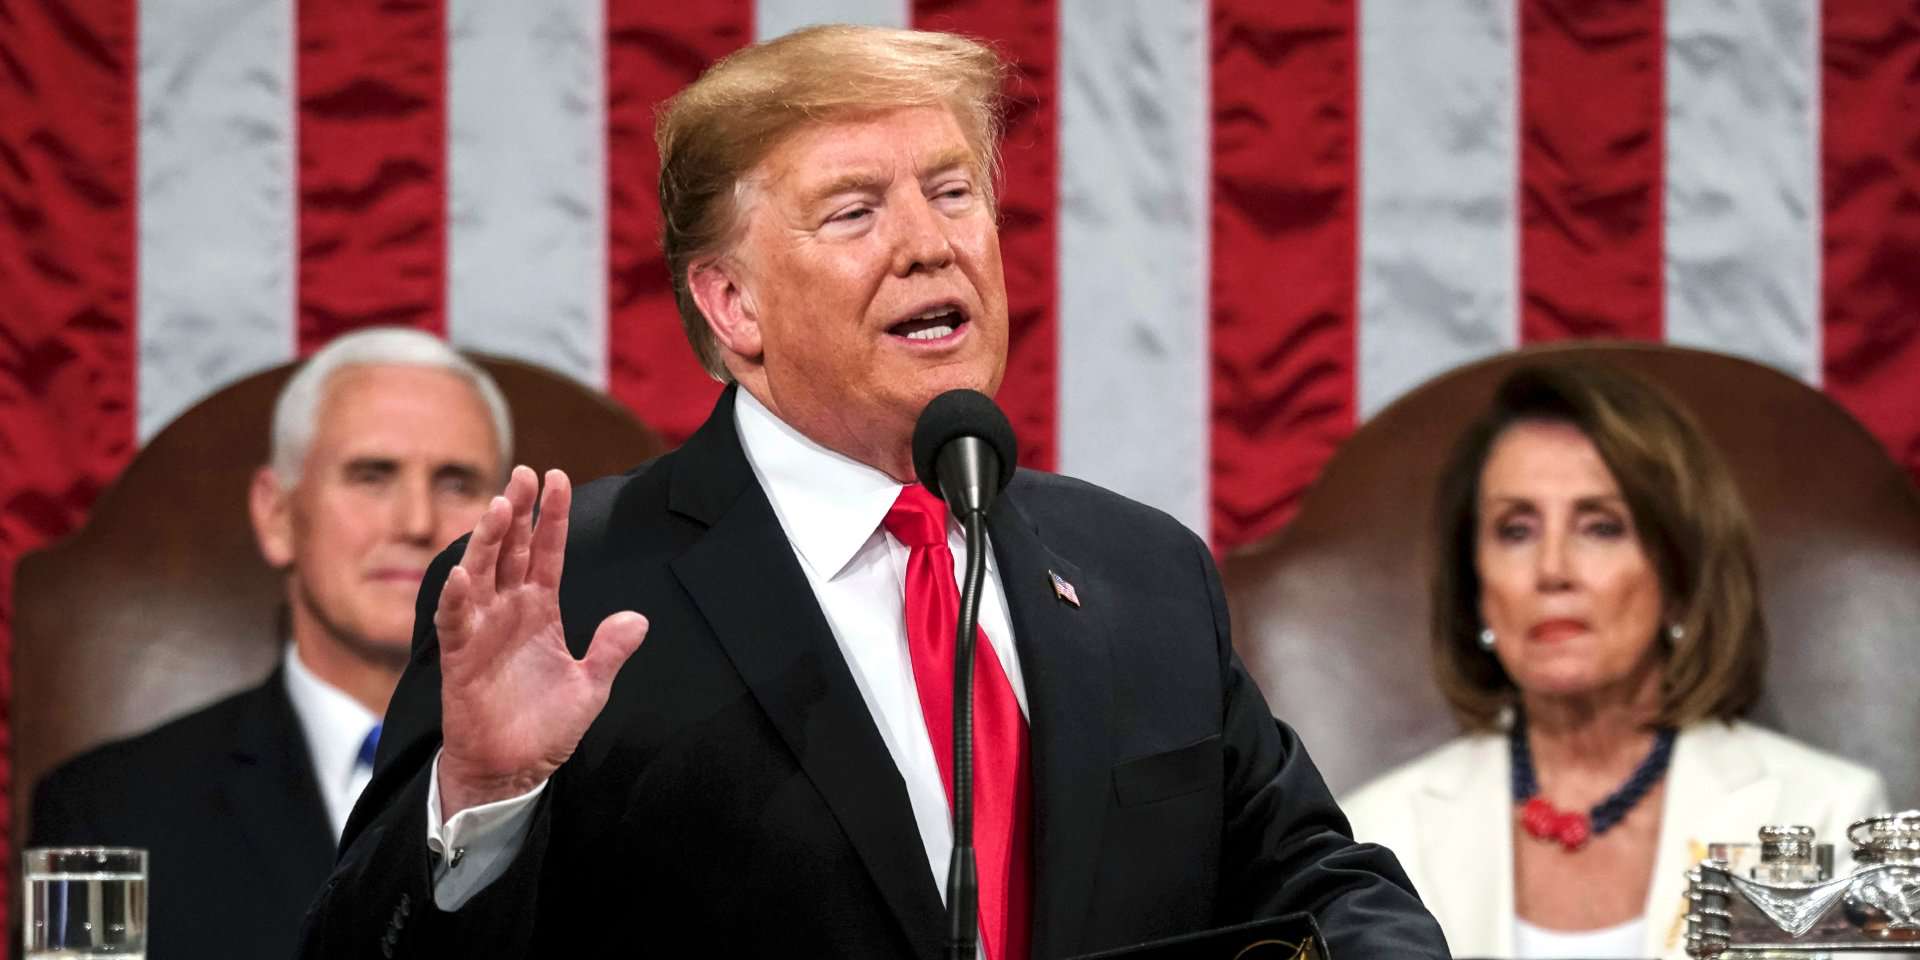 Taboola Ad Example 61911 - 8 Key Takeaways From Trump's State Of The Union Address